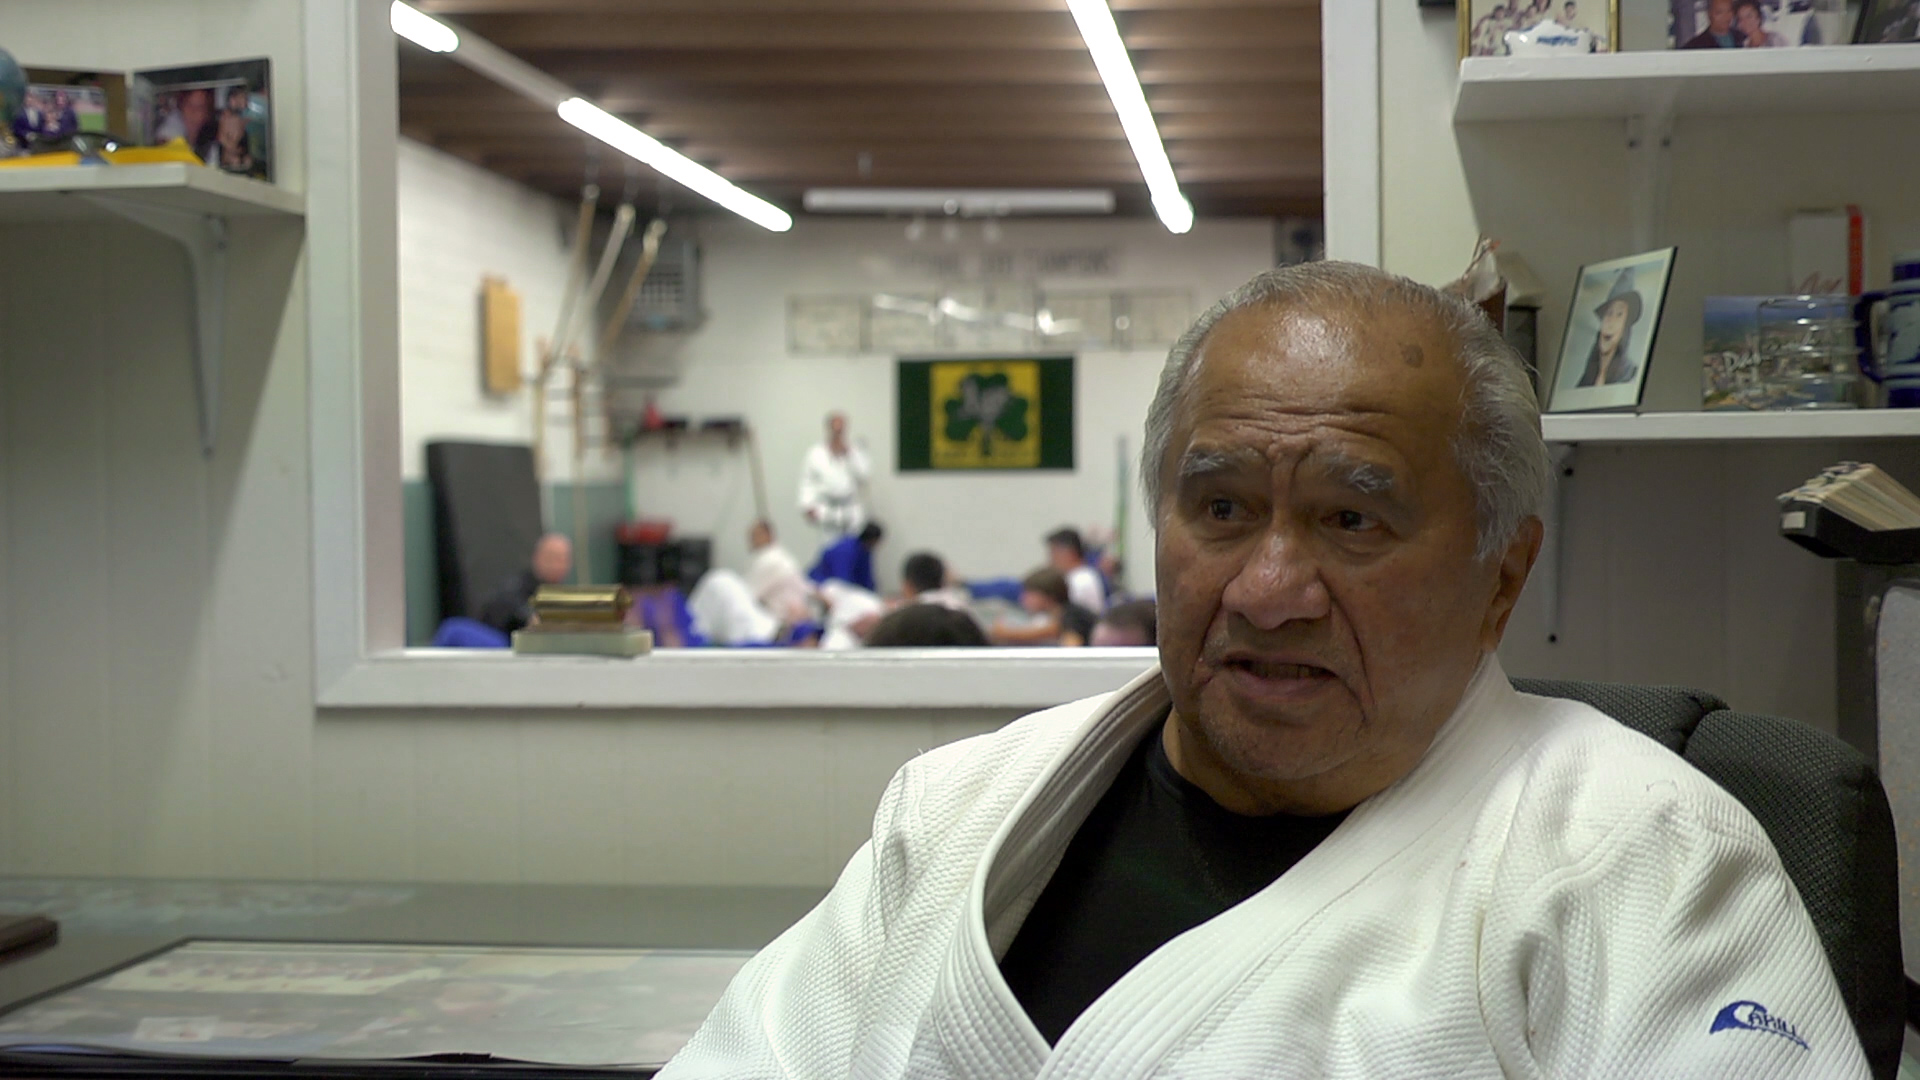 Coach Willy Cahill Interview / Filming by Steven Simon of Feeling Judo